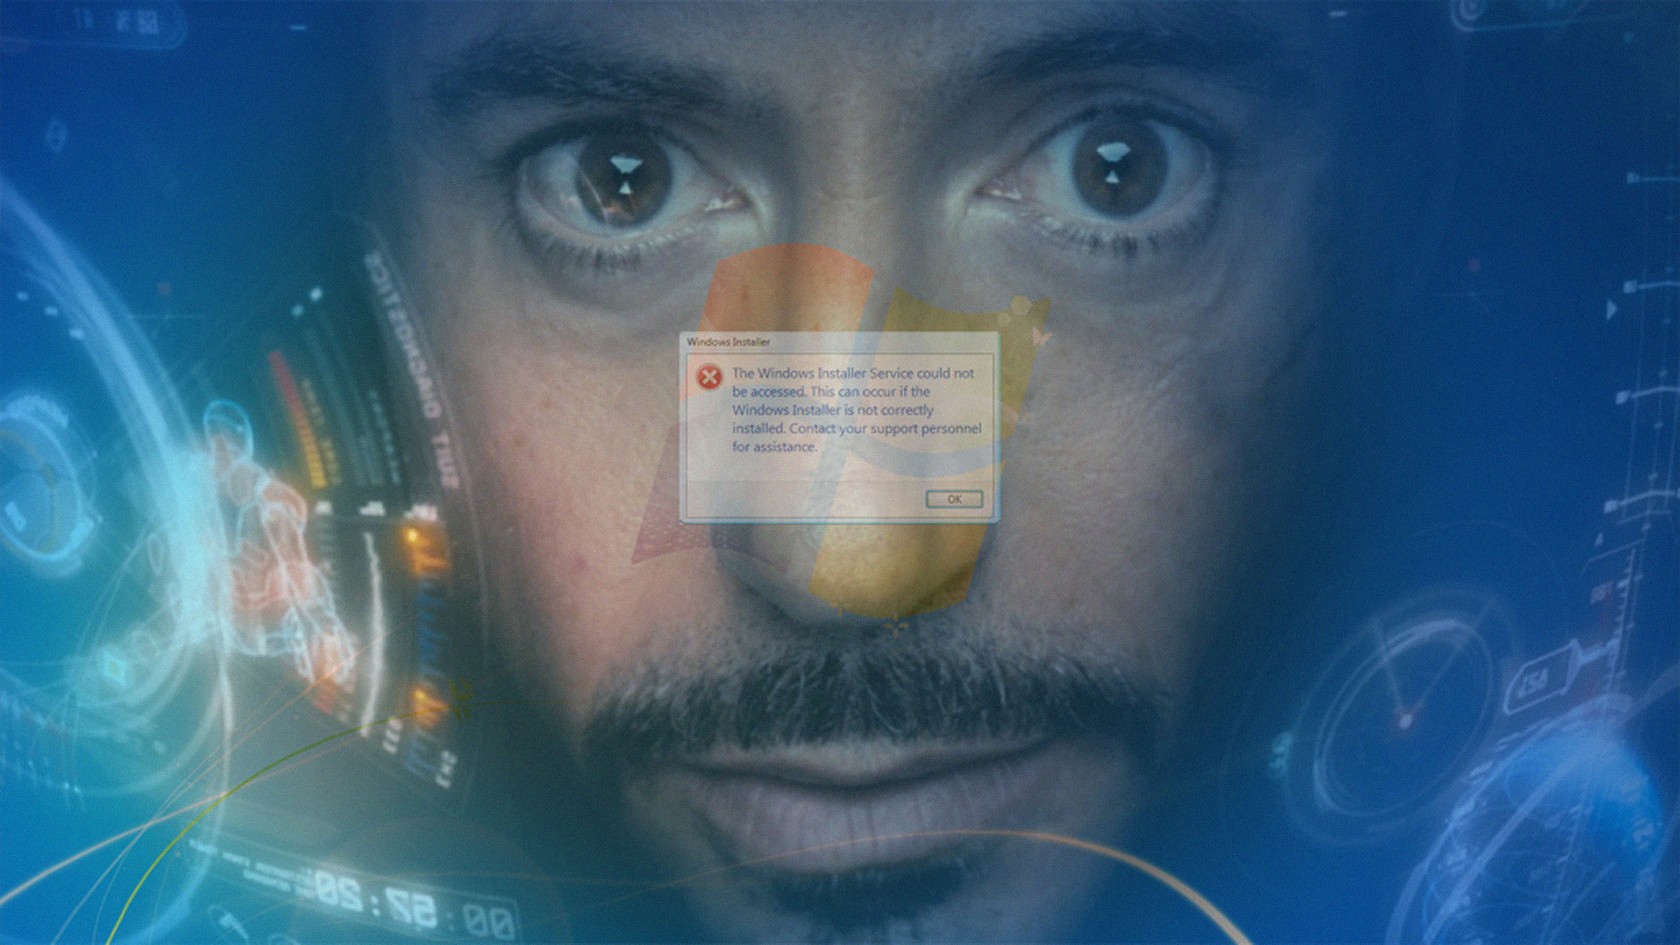 General 1680x945 Iron Man operating system errors Windows 7 humor movies Marvel Cinematic Universe Robert Downey Jr. moustache blue Blue Screen of Death face Microsoft Windows movie characters Windows Errors computer